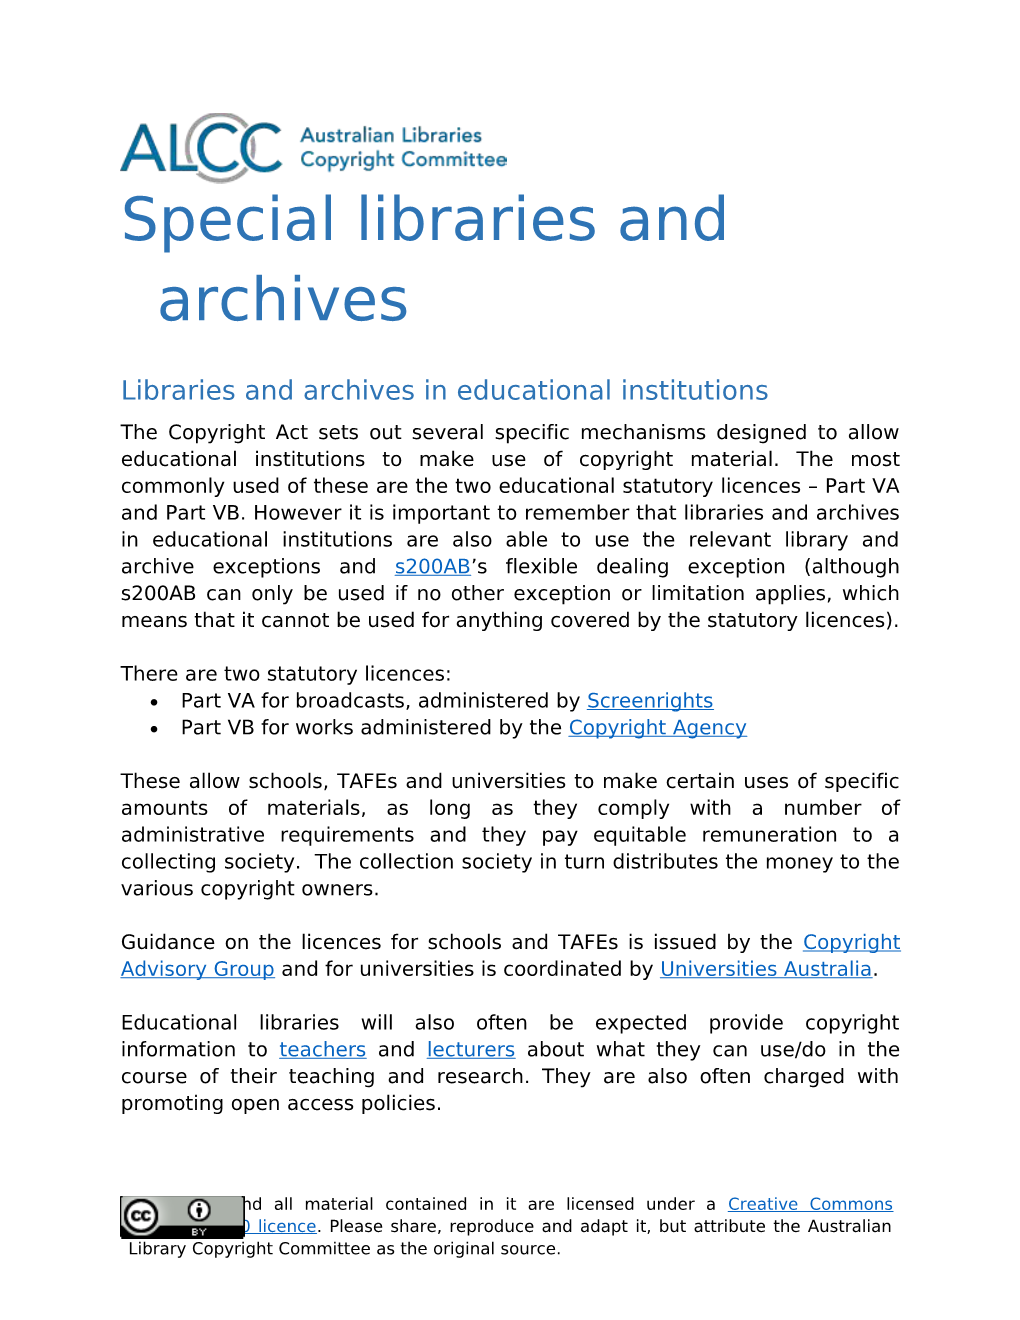 Special Libraries and Archives